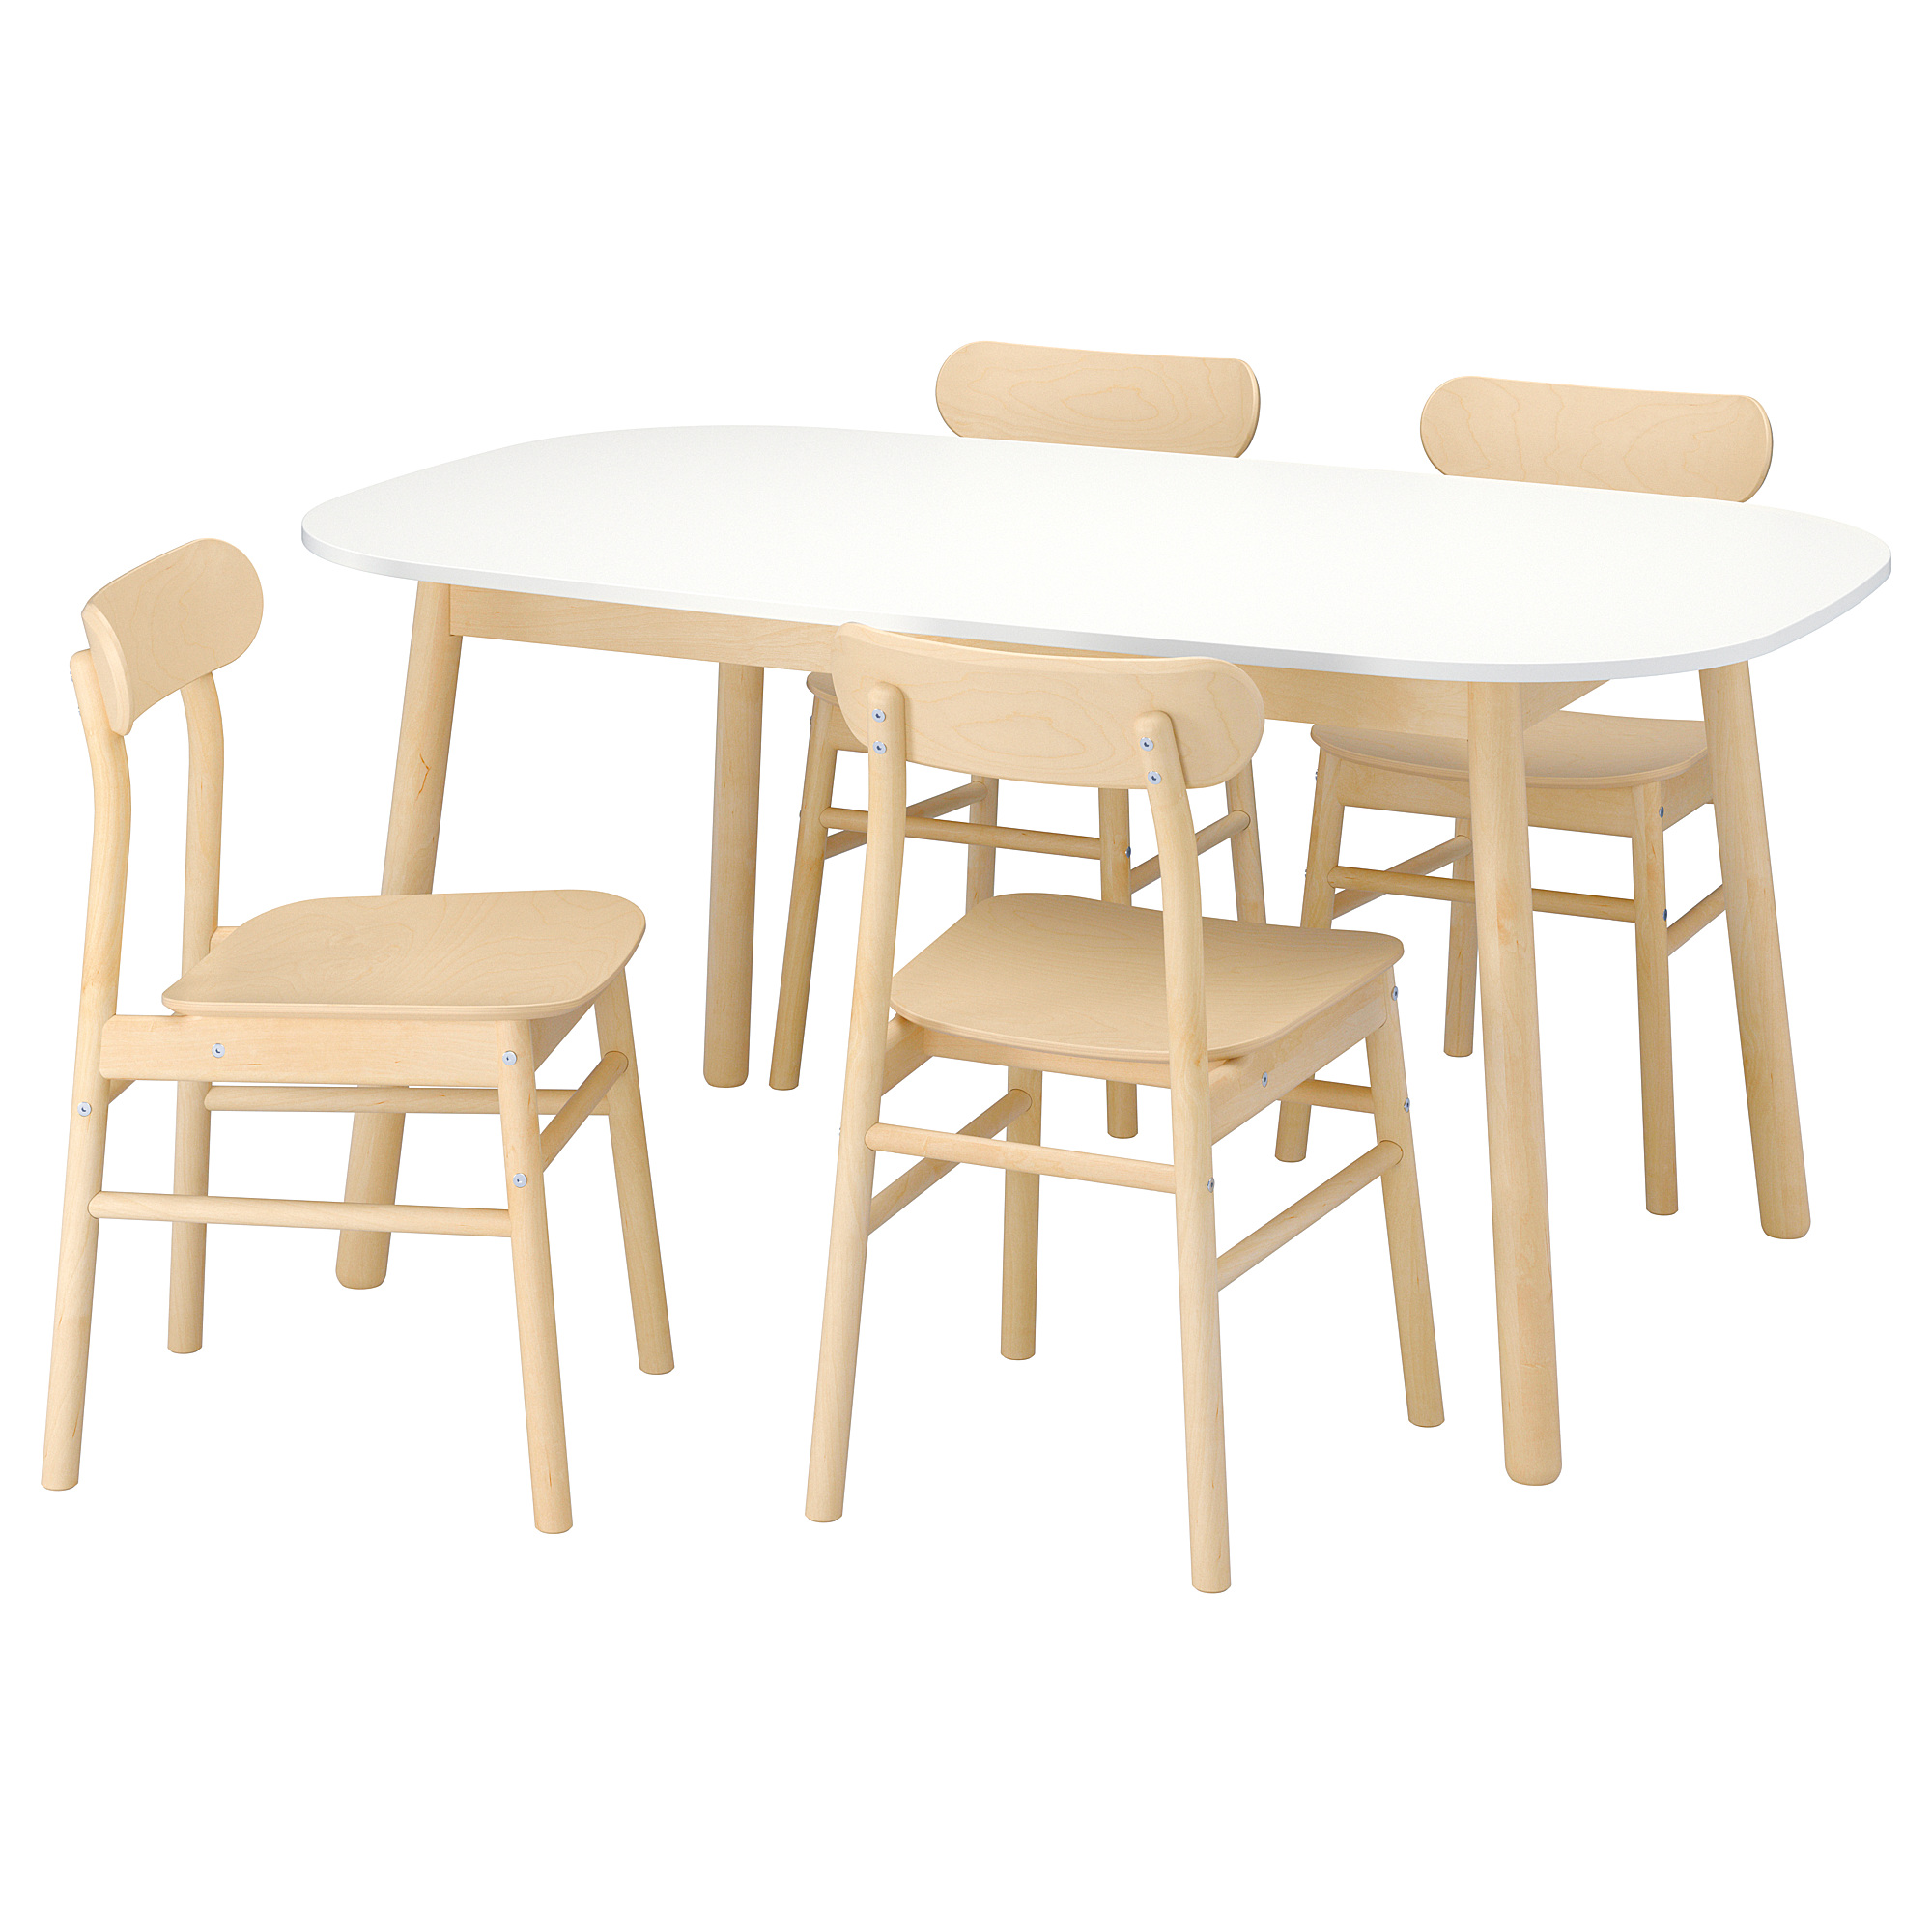 VEDBO/RÖNNINGE table and 4 chairs